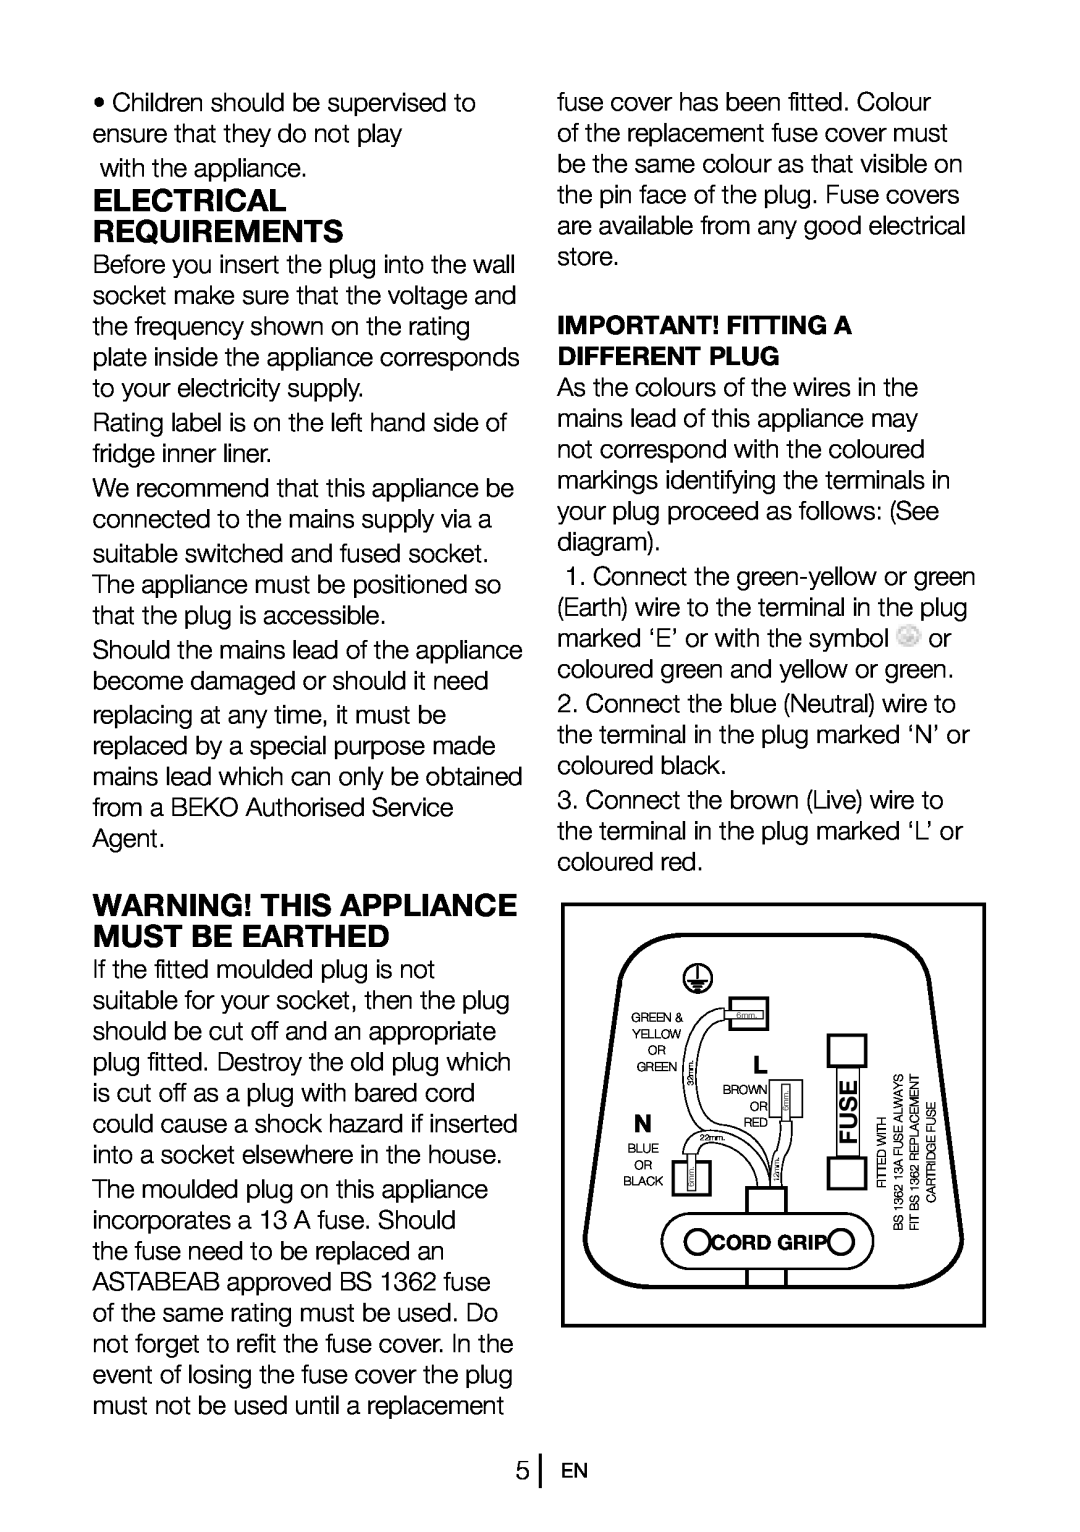 Beko CS5533APW Electrical Requirements, Warning! This Appliance Must Be Earthed, Important! Fitting A Different Plug, Fuse 